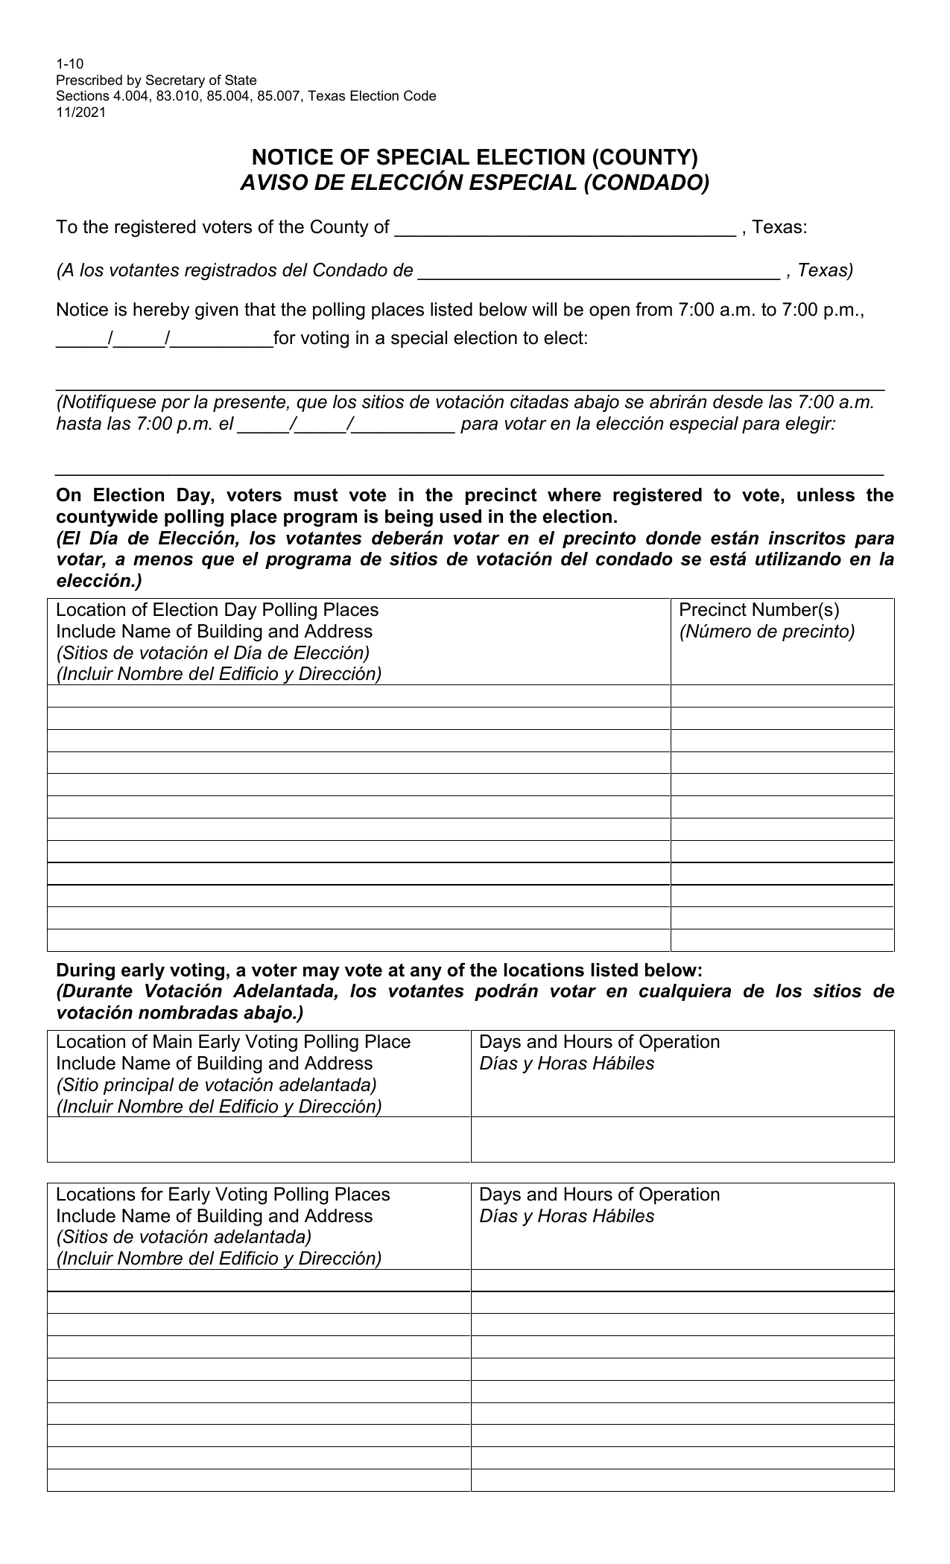 Form 1-10 Notice of Special Election (County) - Texas (English / Spanish), Page 1